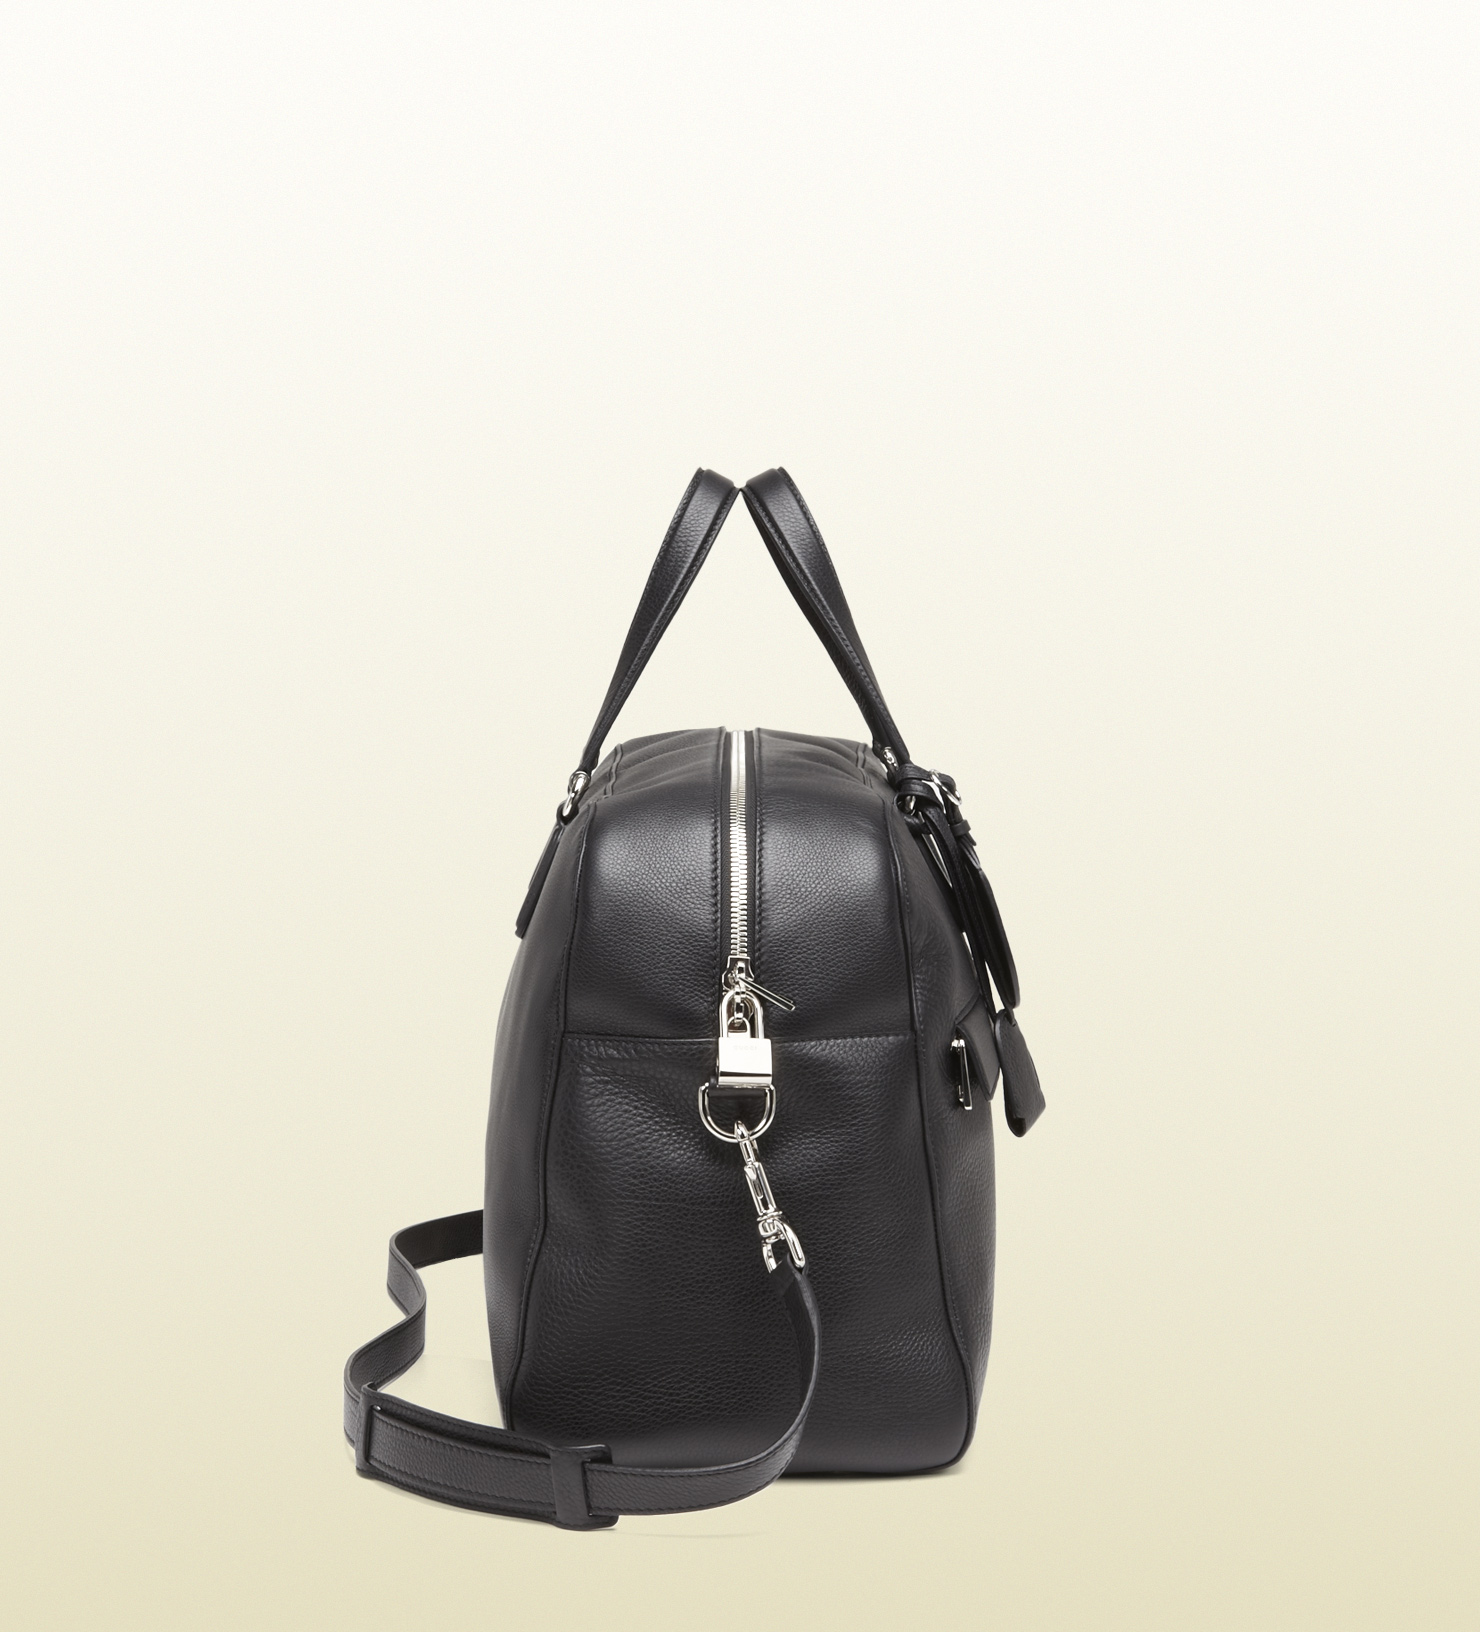 Lyst - Gucci Black Leather Carry-on Duffle Bag in Black for Men